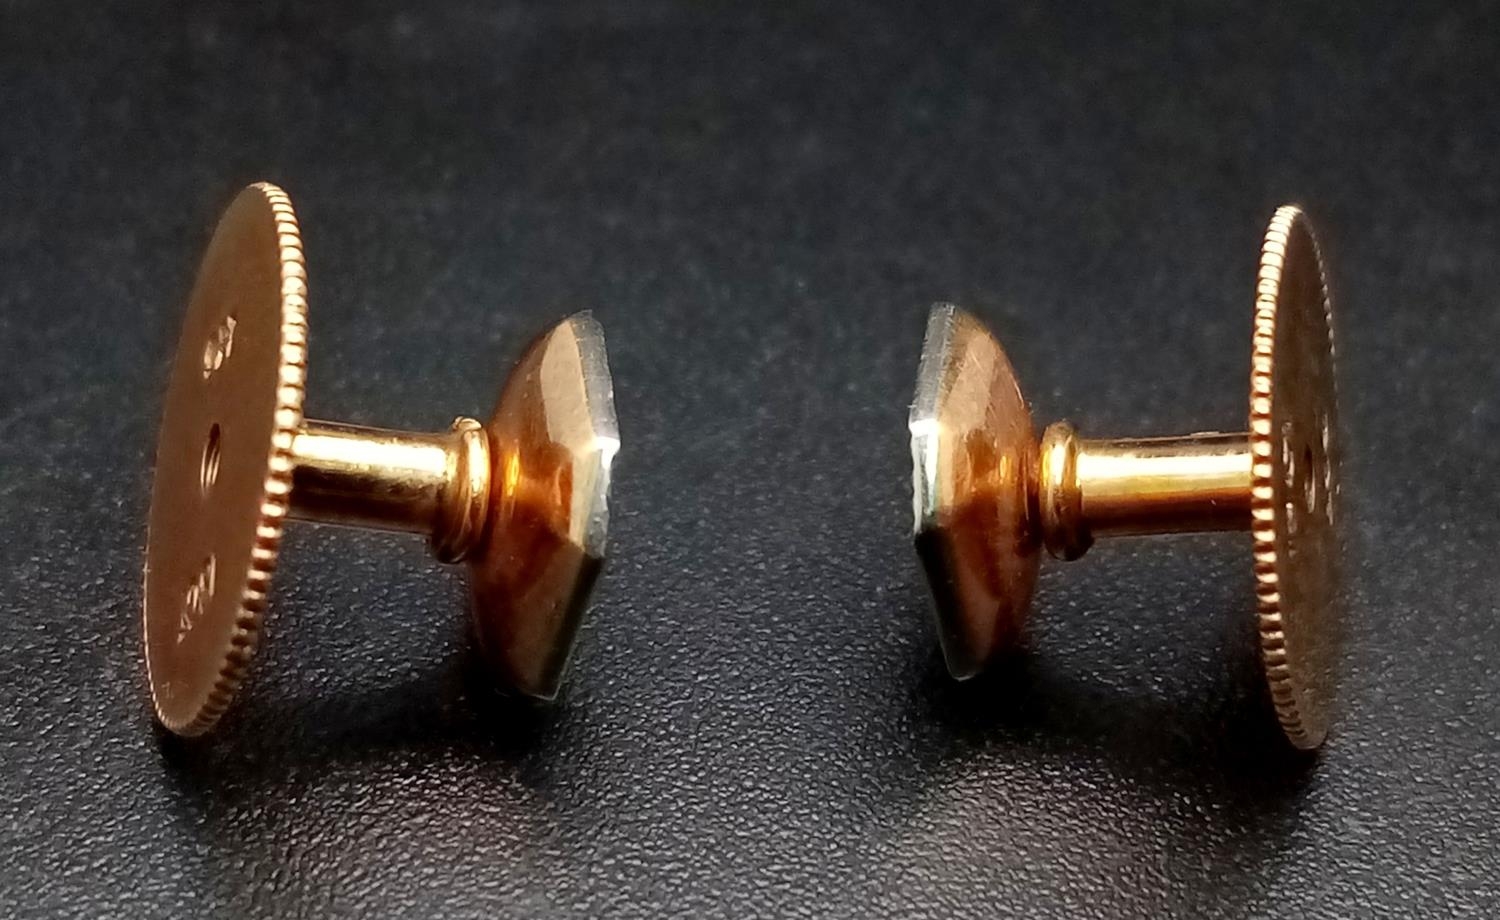 A Pair of 18 and 9K Mother of Pearl Shirt Studs - In their original packaging. 2.1g total weight. - Image 3 of 4